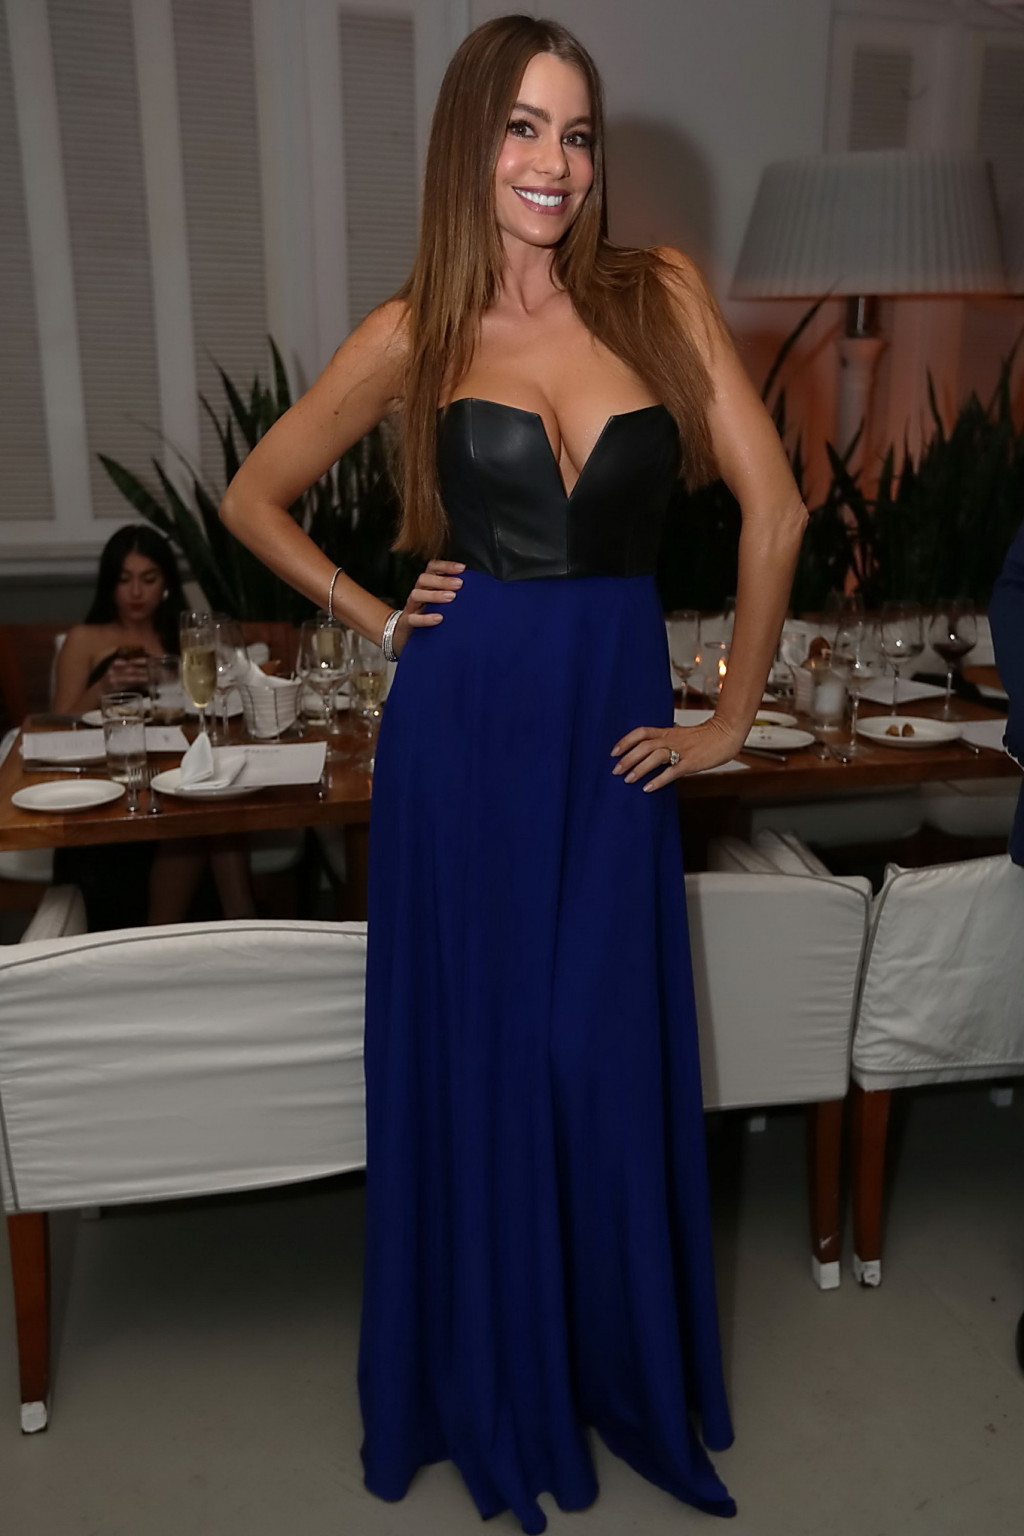 Sofia Vergara busting out in tiny leather strapless top at Delano South Beach Ri #75244739